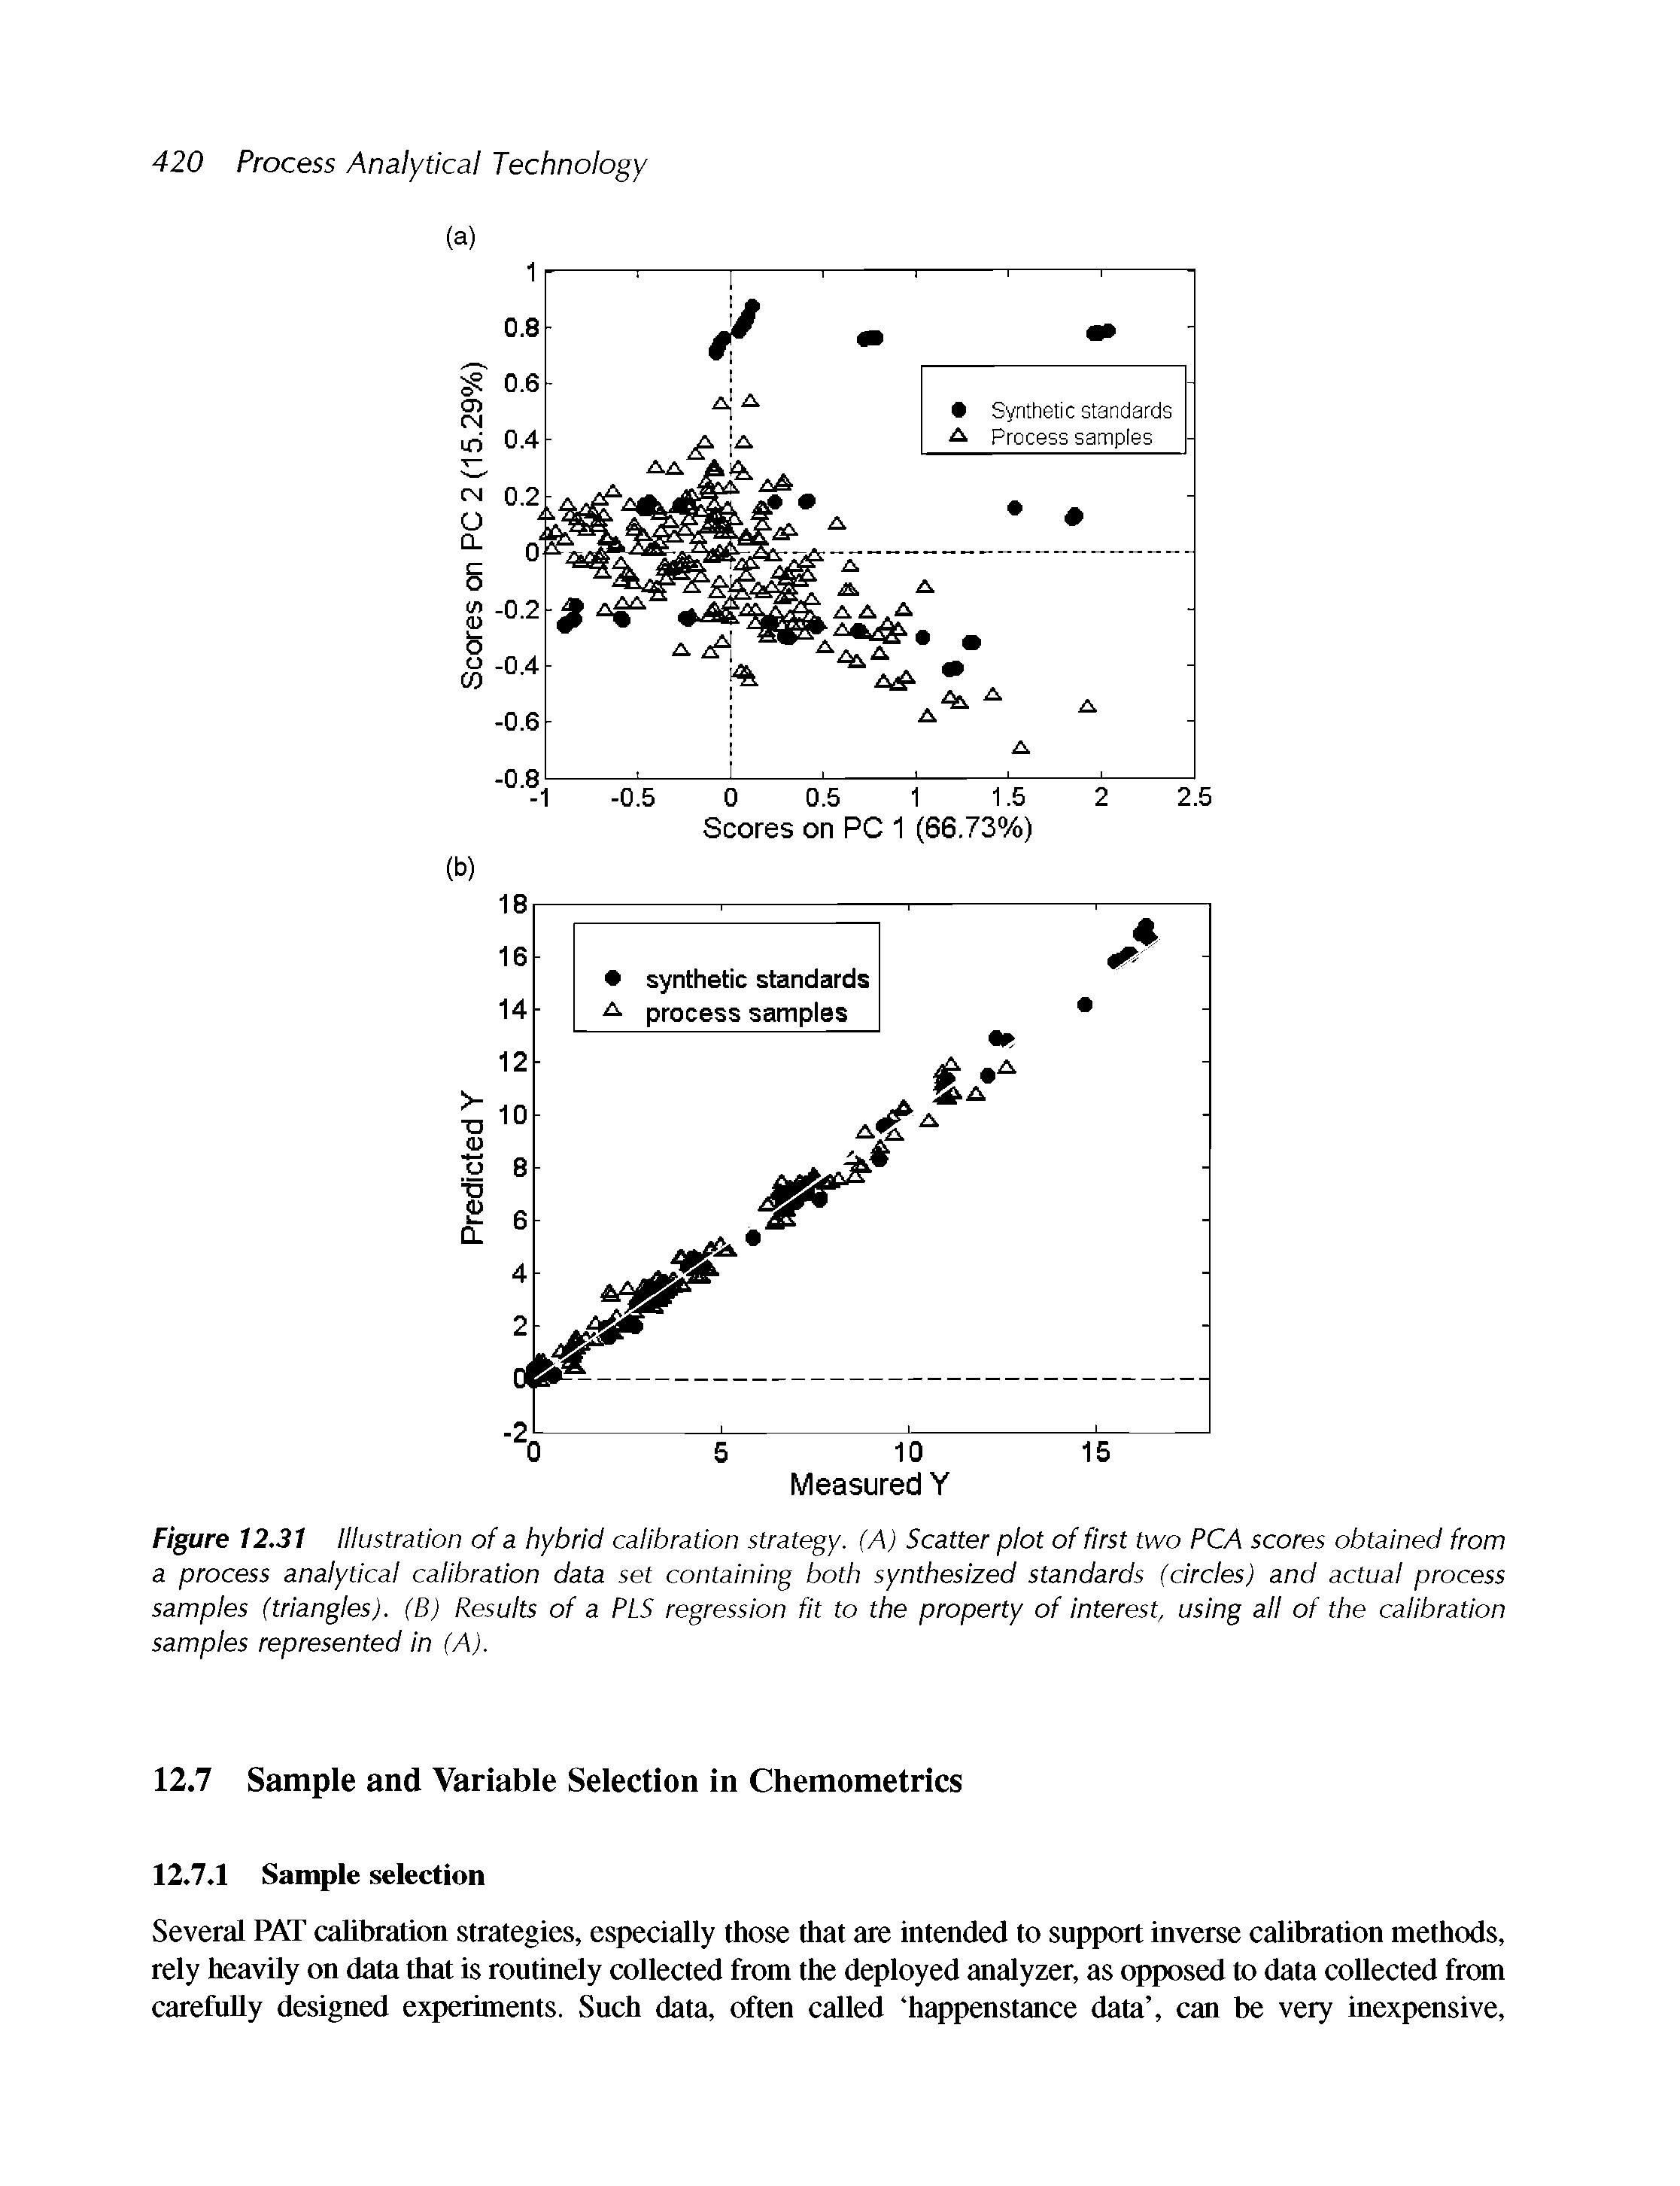 Figure 12.31 Illustration of a hybrid calibration strategy. (A) Scatter plot of first two PCA scores obtained from a process analytical calibration data set containing both synthesized standards (circles) and actual process samples (triangles). (B) Results of a PLS regression fit to the property of Interest, using all of the calibration samples represented In (A).